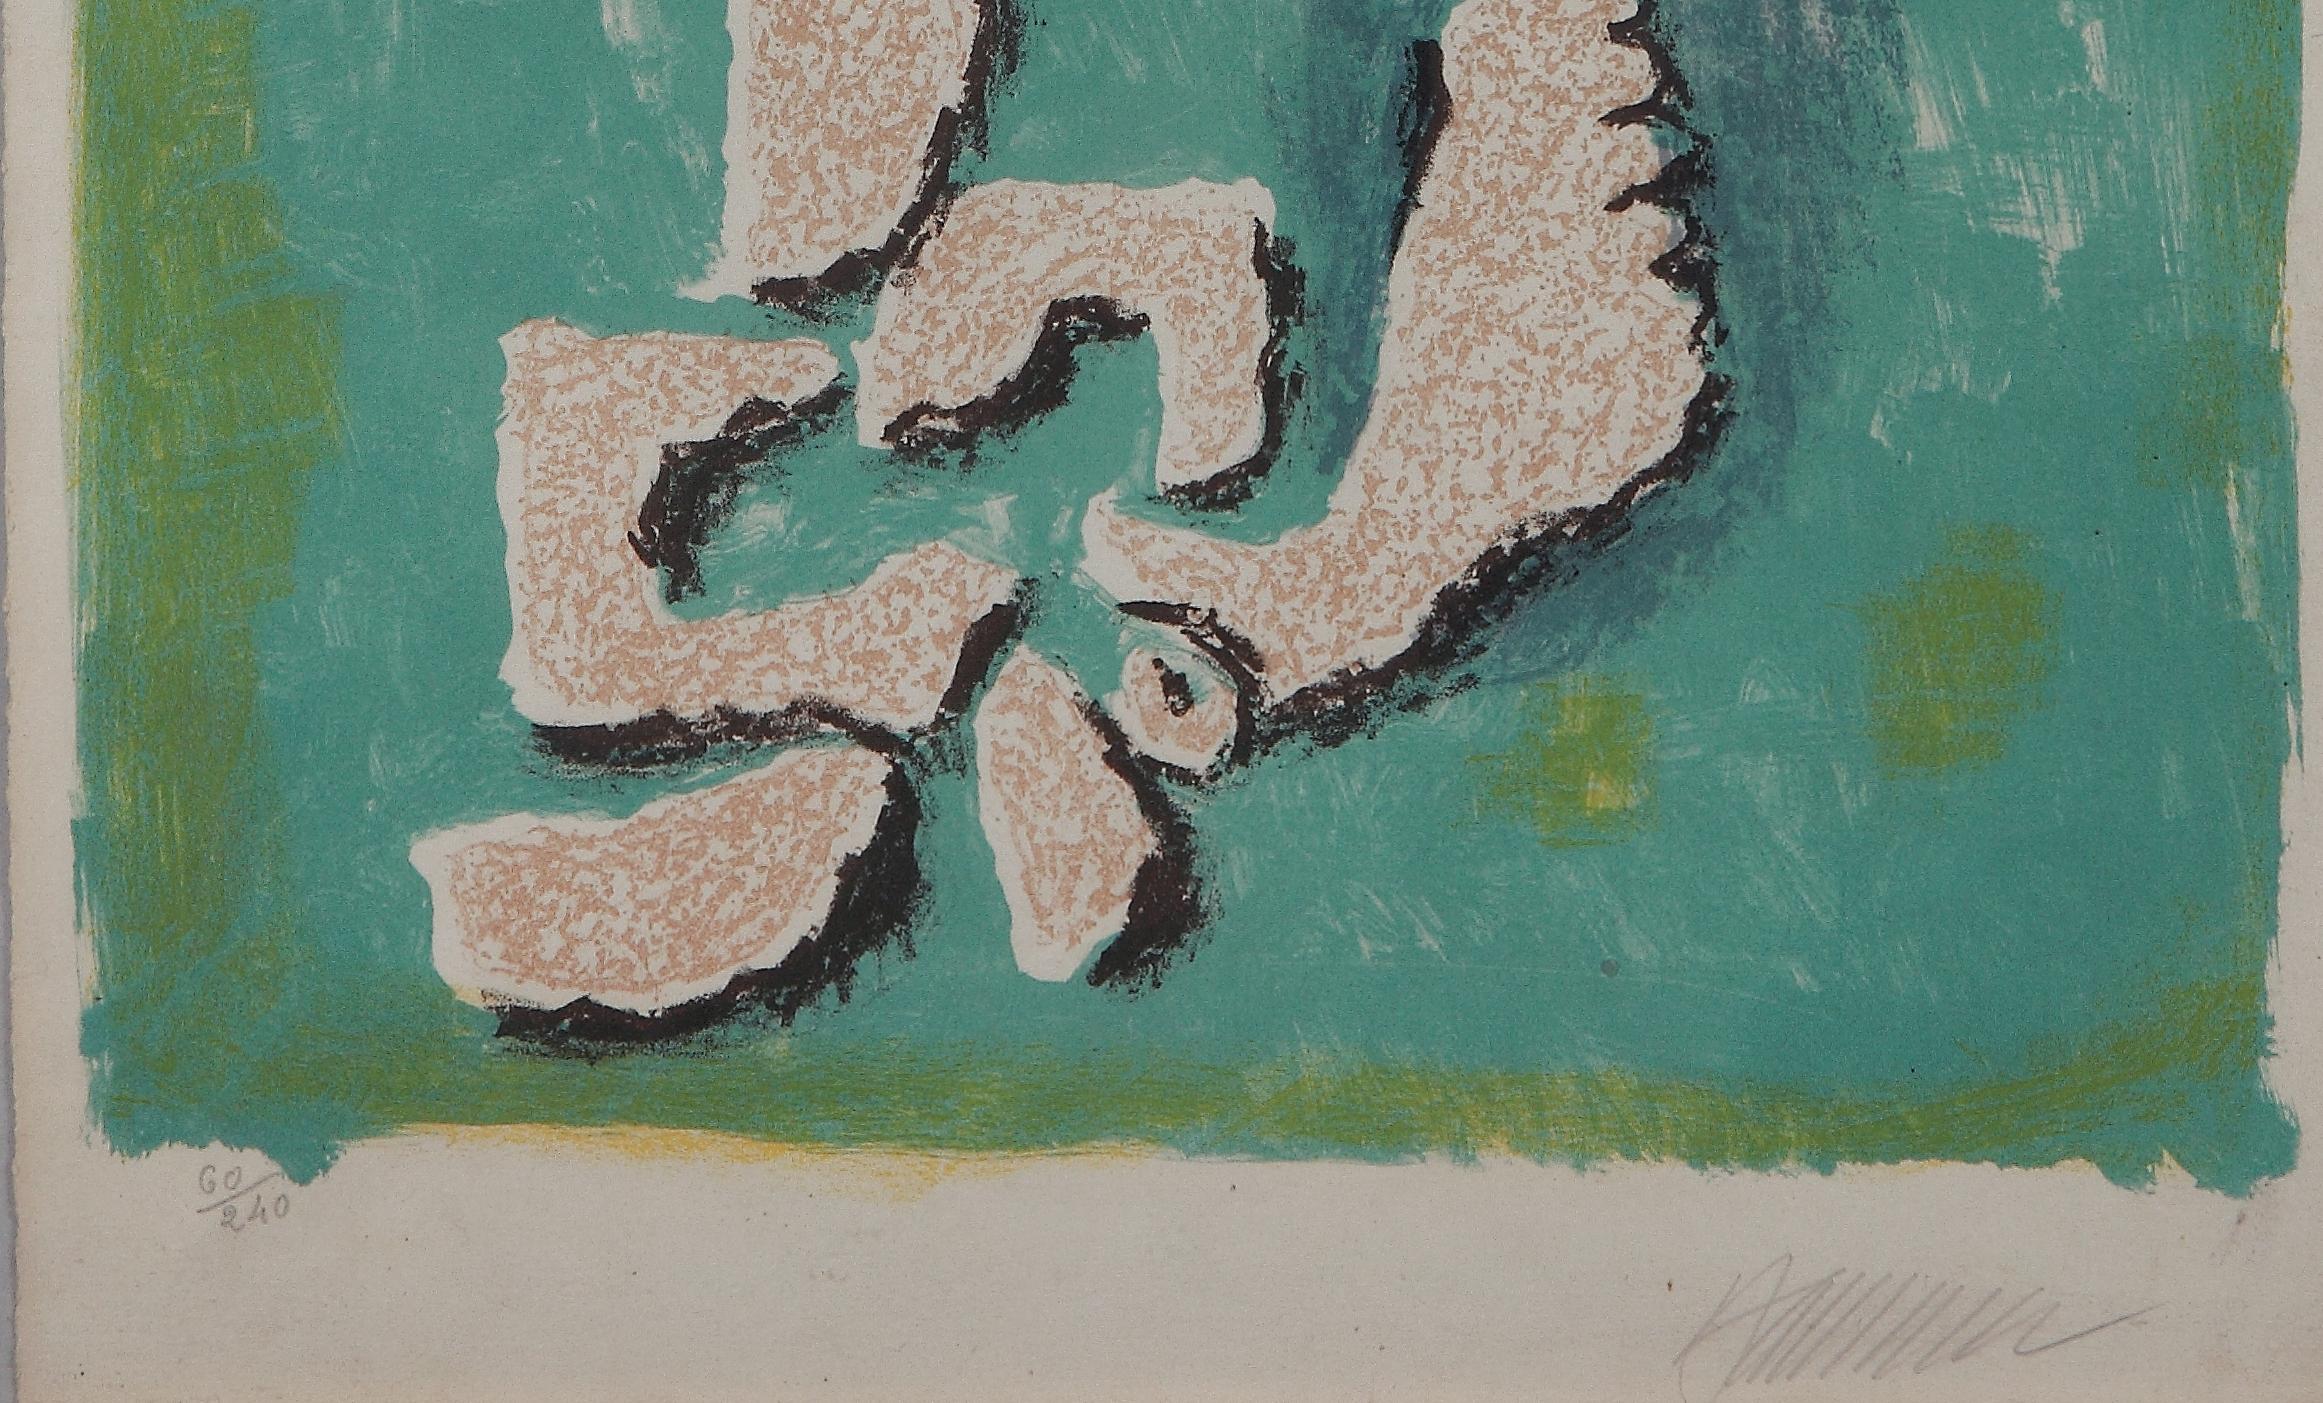 Lithograph in color on vellum paper, 1953 by Willi Baumeister ( 1889-1955 ), Germany. Signed lower right. 
Numbered lower left: 60/240. Sheet 22.6 x 15.2 in ( 57,4 x 38,6 cm ), Framed: 24.53 x 18.11 in ( 62,3 x 46 cm )